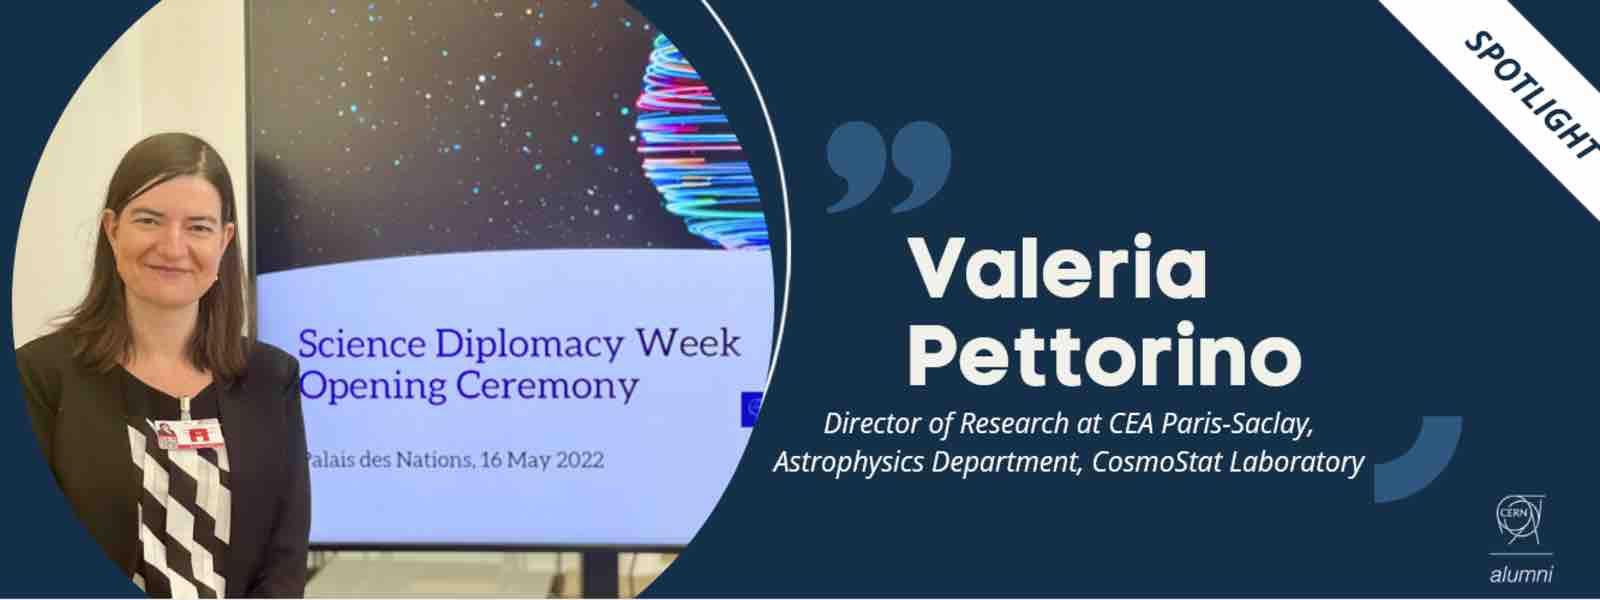 Valeria Pettorino: Making an impact in Space, Cosmos and Mentoring